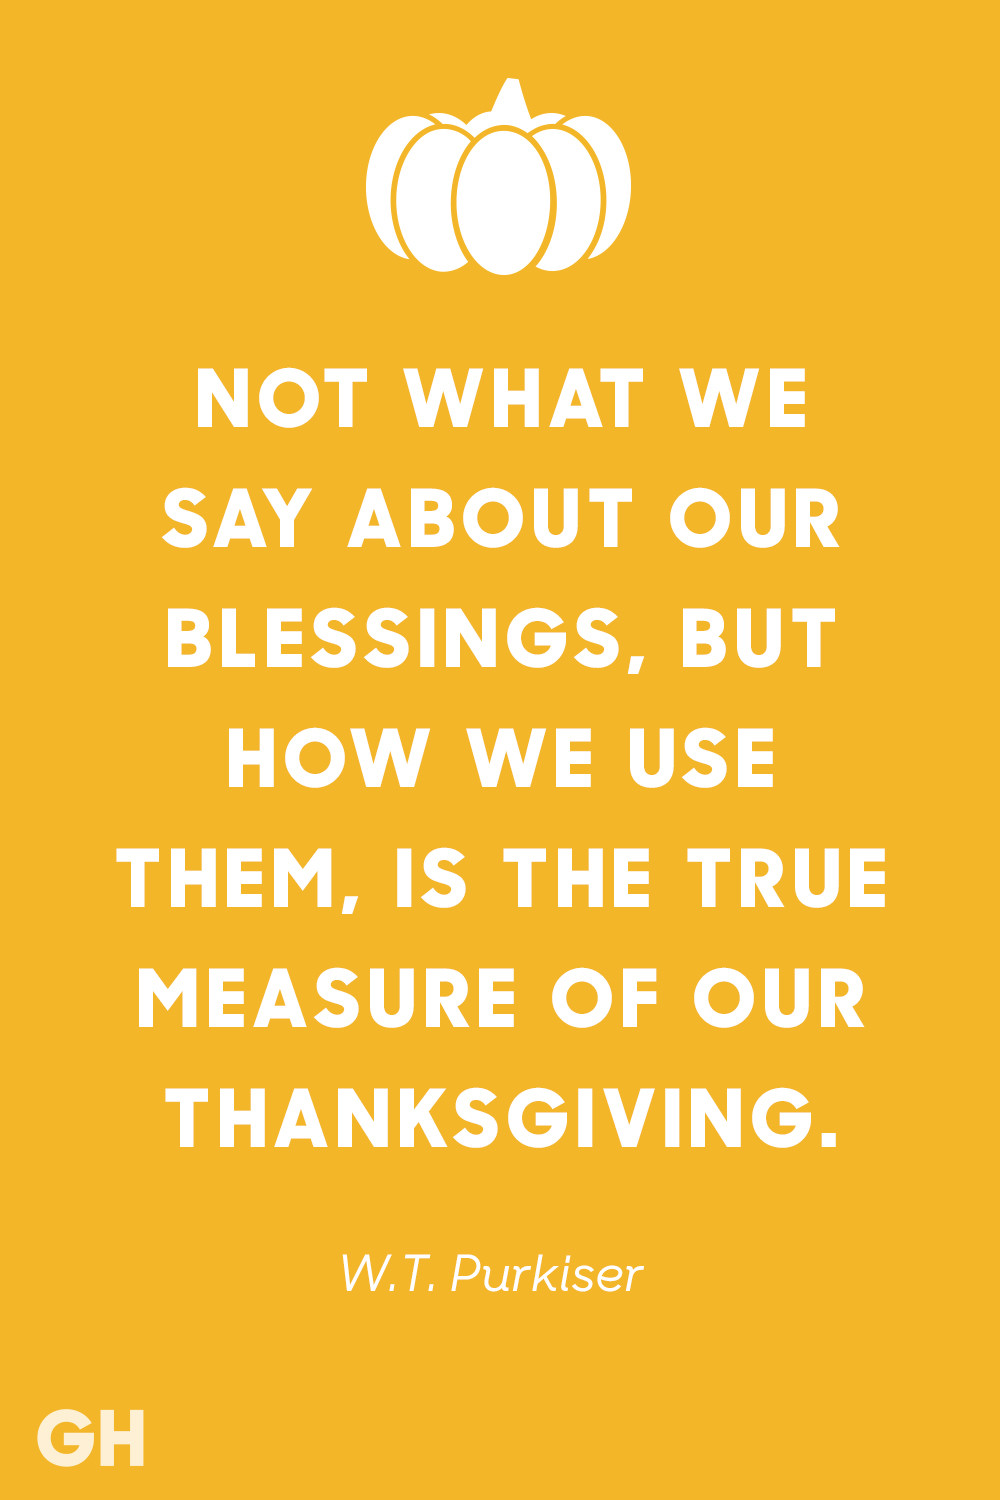 Quotes Thanksgiving
 15 Best Thanksgiving Quotes Inspirational and Funny